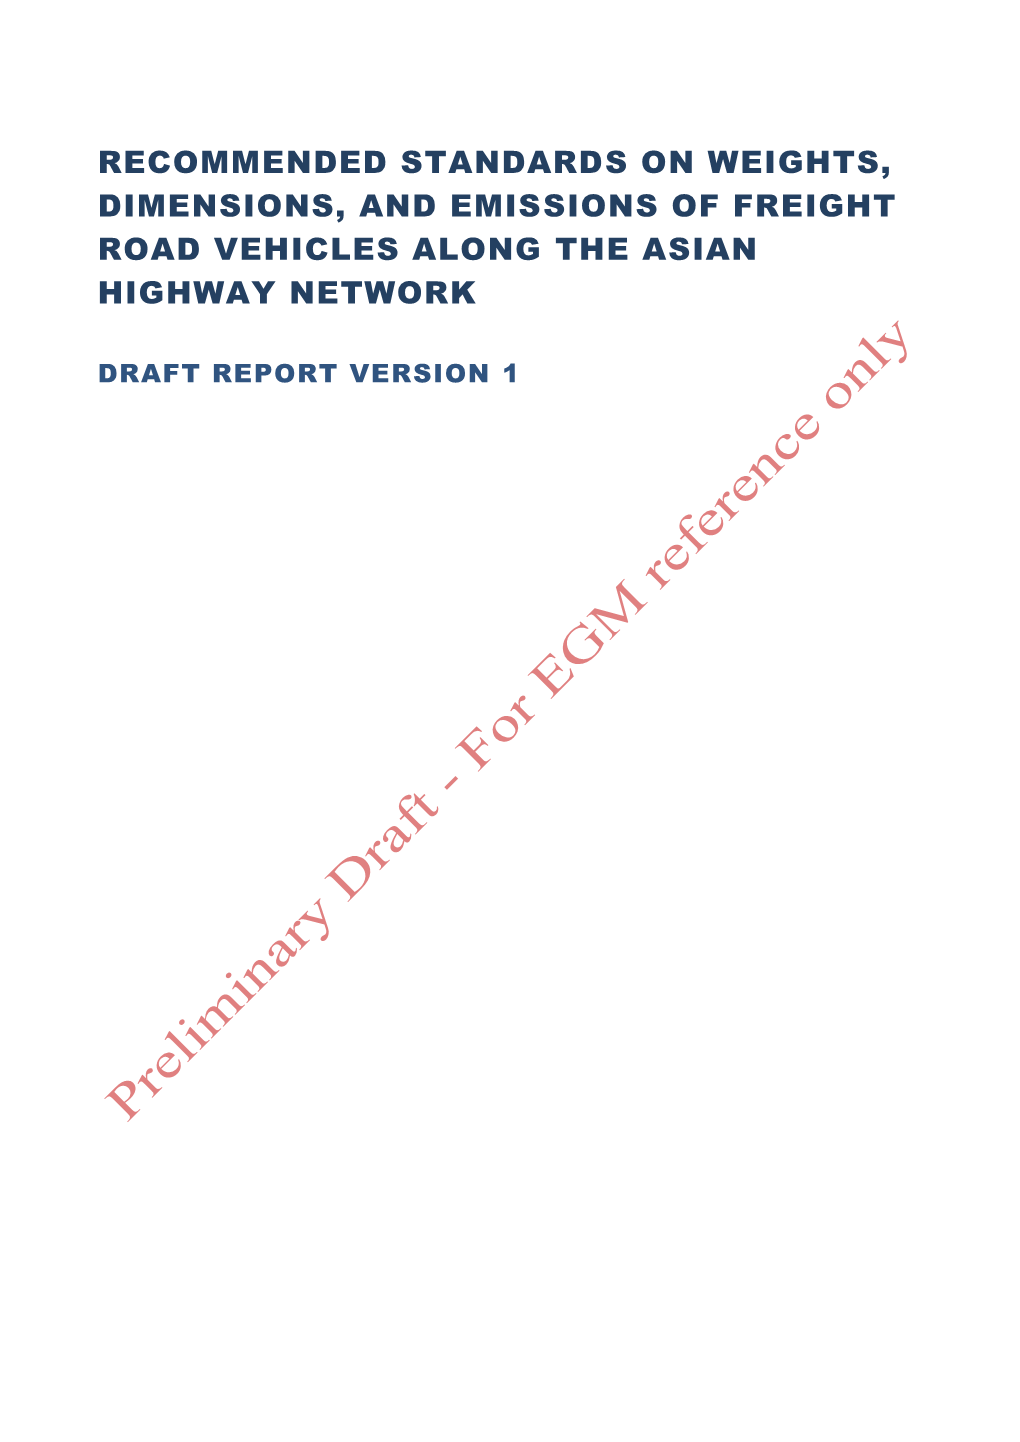 Recommended Standards on Weights, Dimensions, and Emissions of Freight Road Vehicles Along the Asian Highway Network